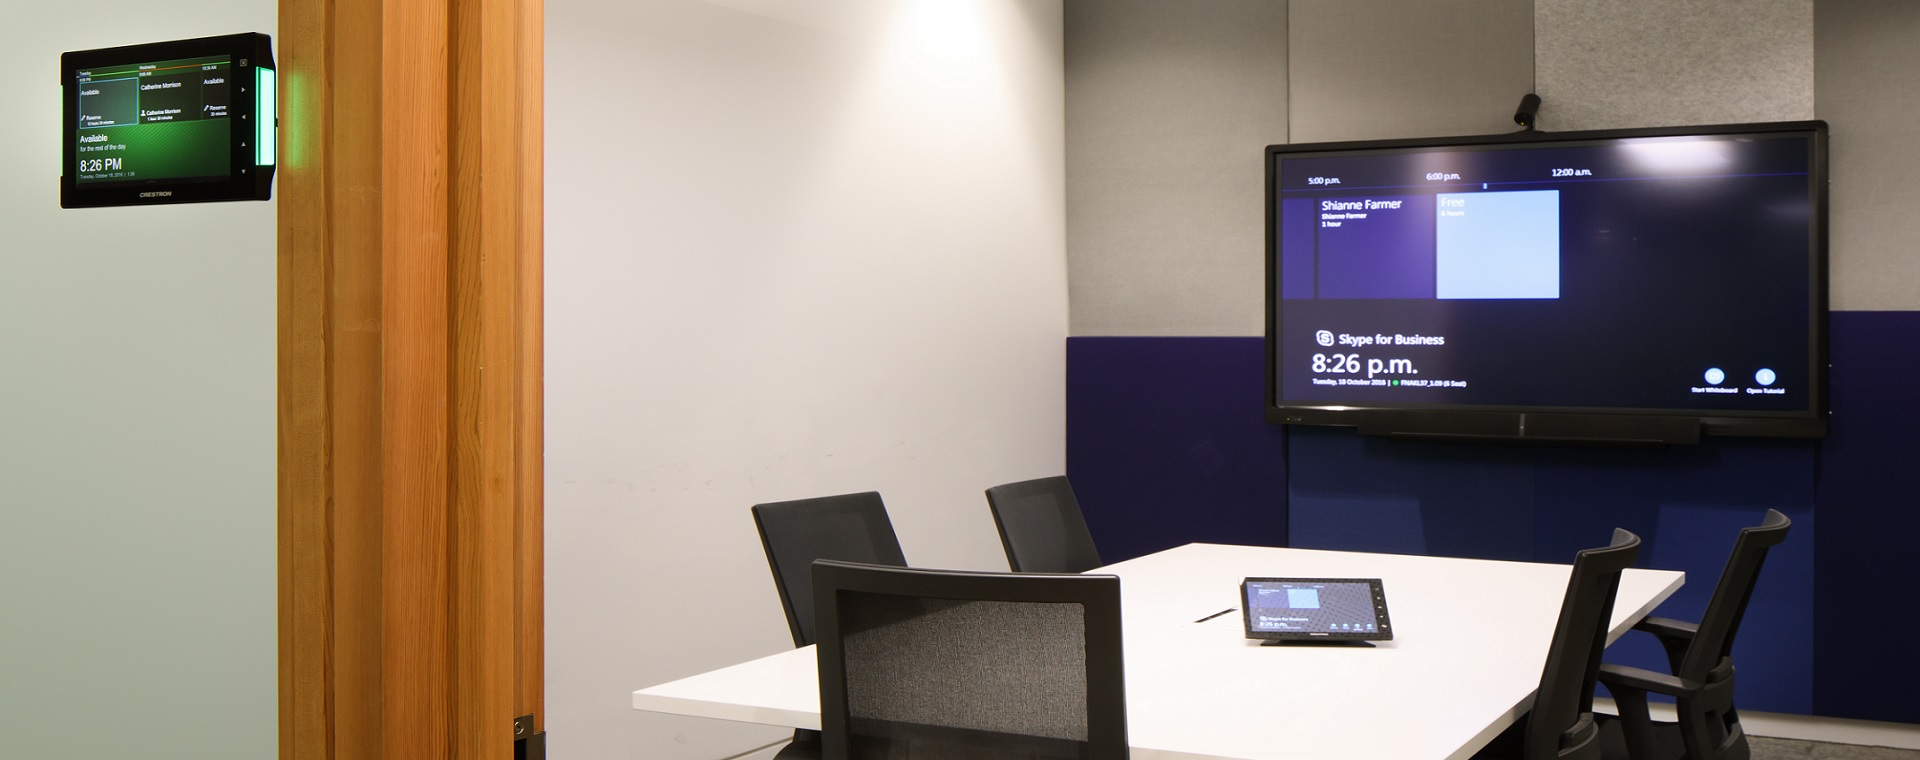 Room booking system, touchscreen control and video conferencing system in a meeting room at Fonterra Global Headquarters